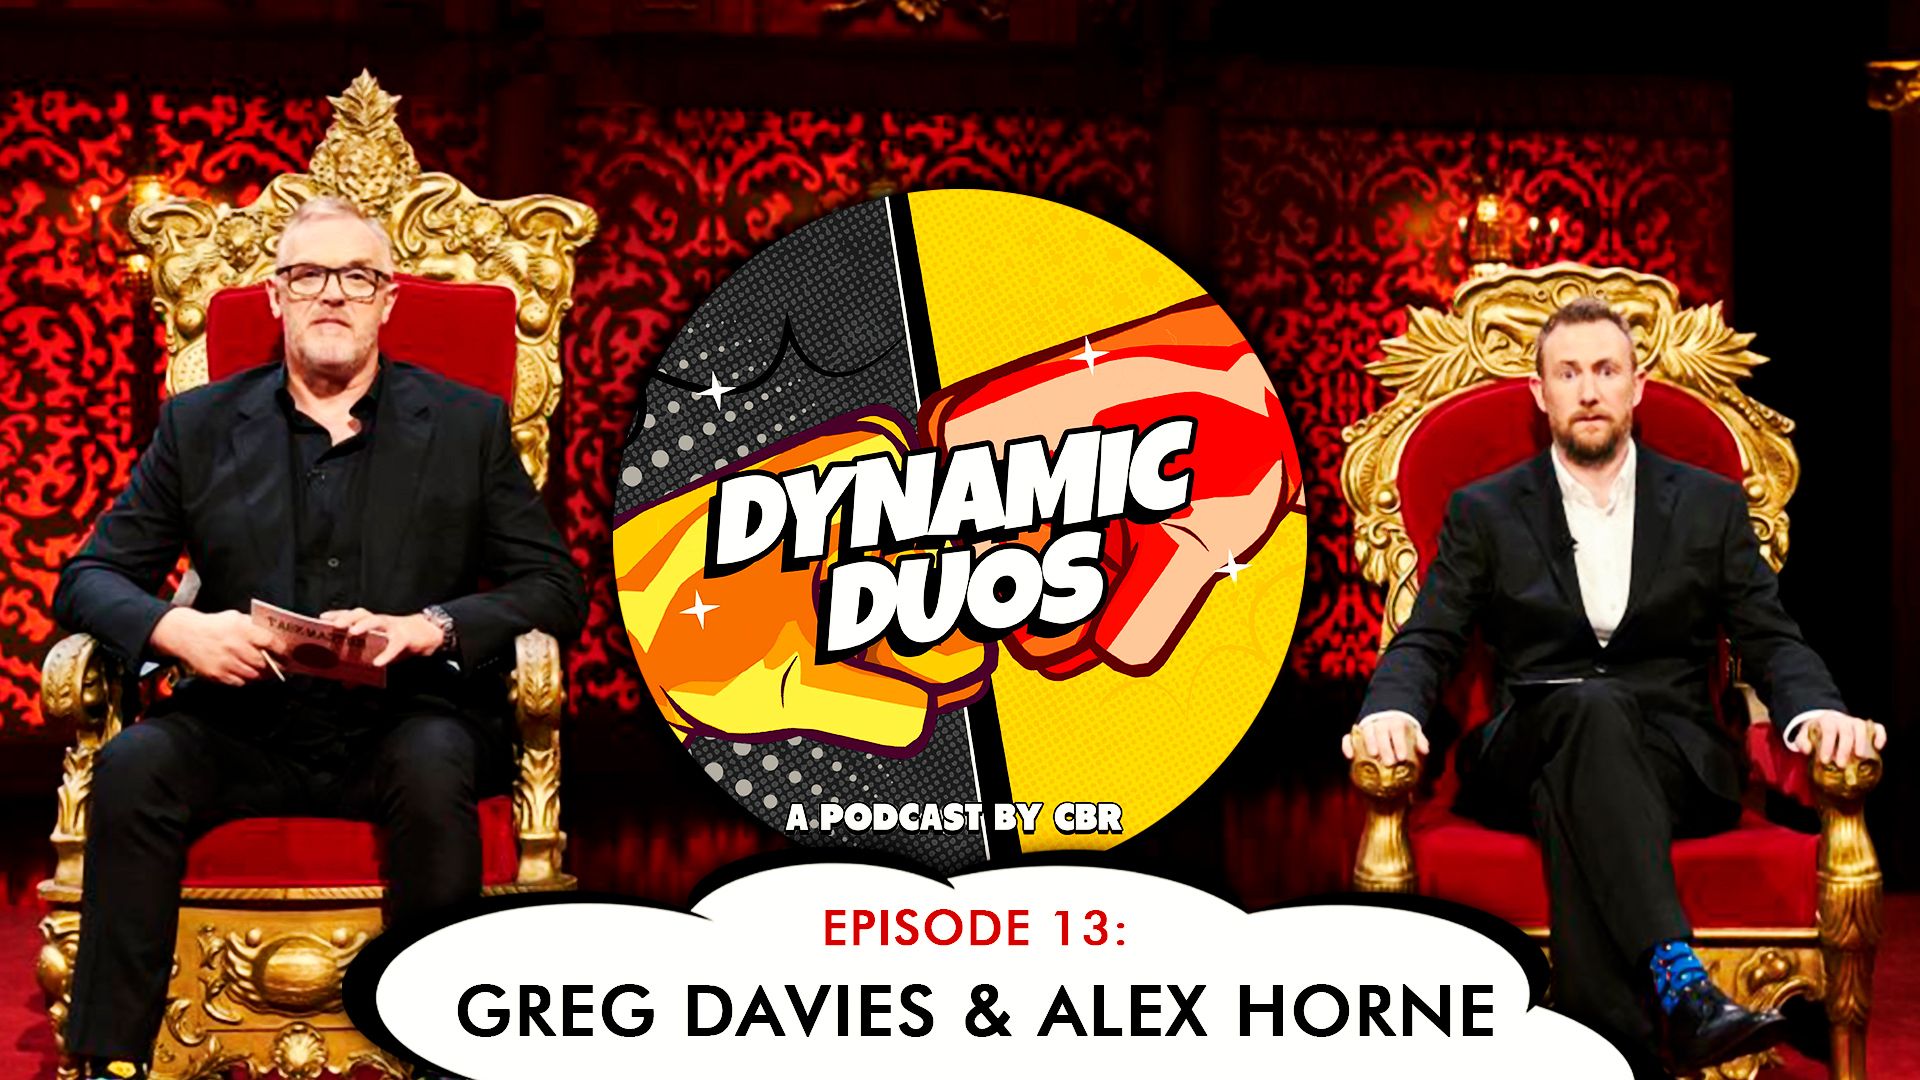 Greg Davies and Alex Horne Dynamic Duos